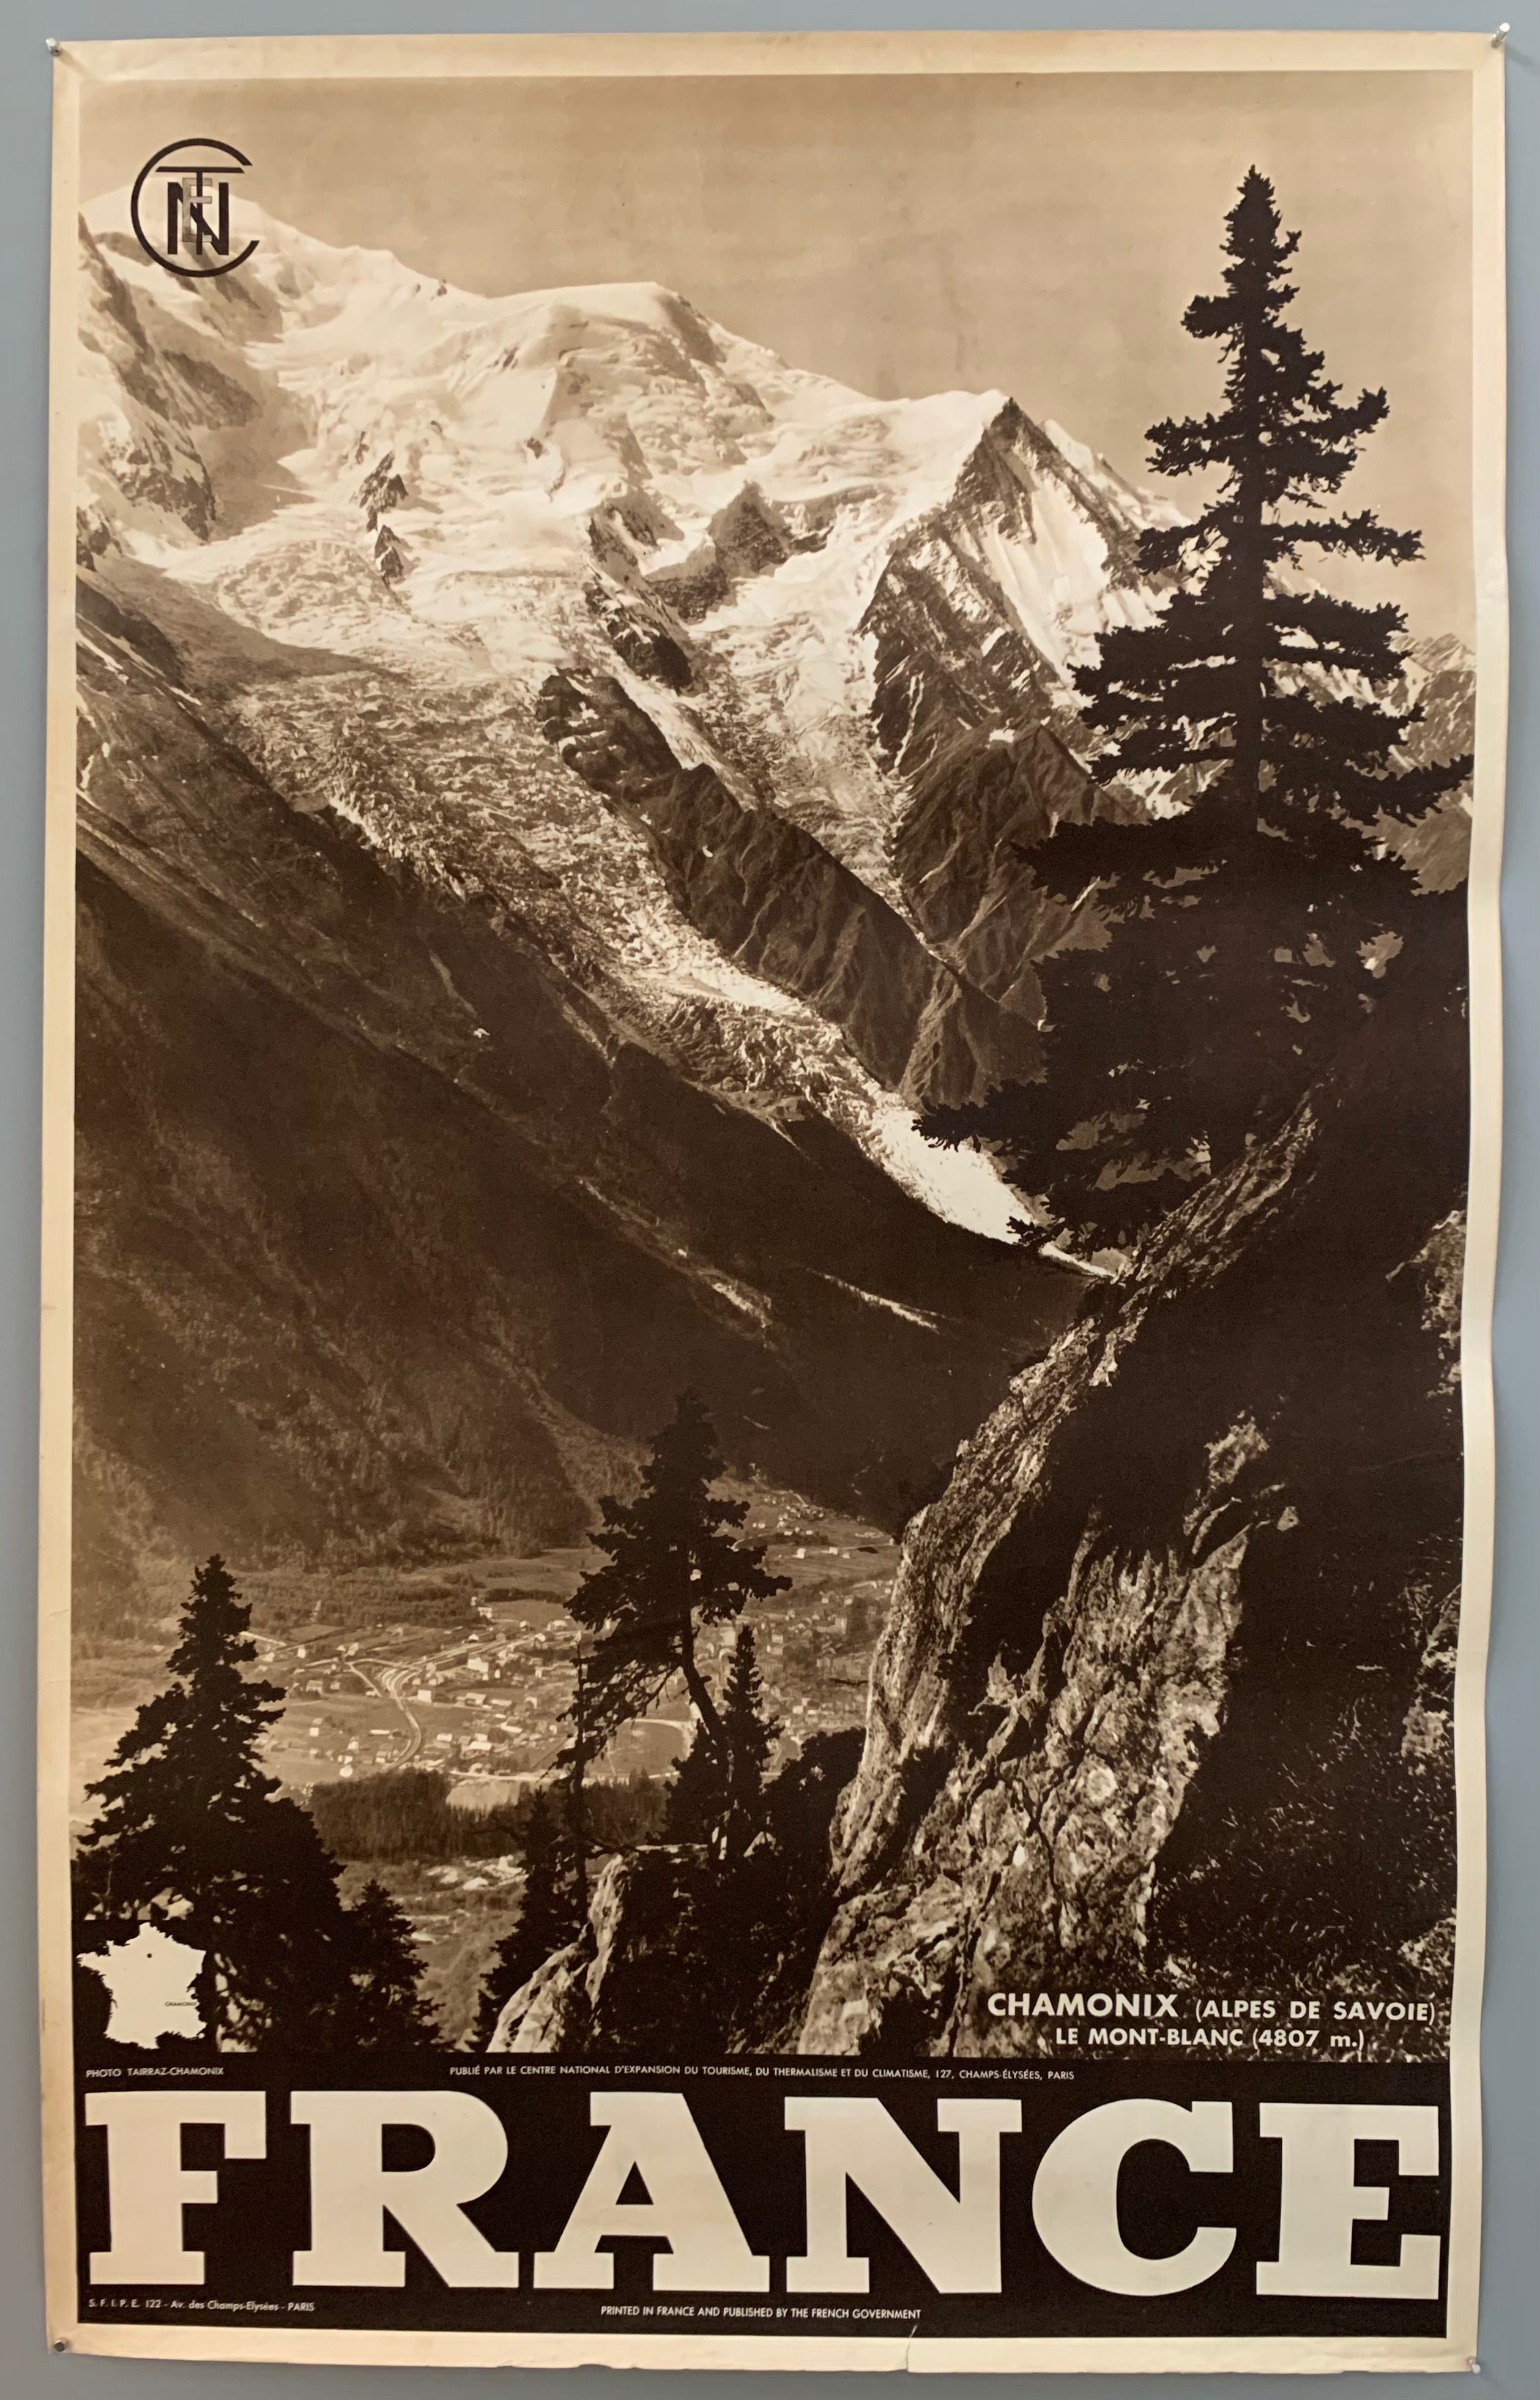 angst Instrument Smitsom sygdom Chamonix Le Mont-Blanc Poster – Poster Museum